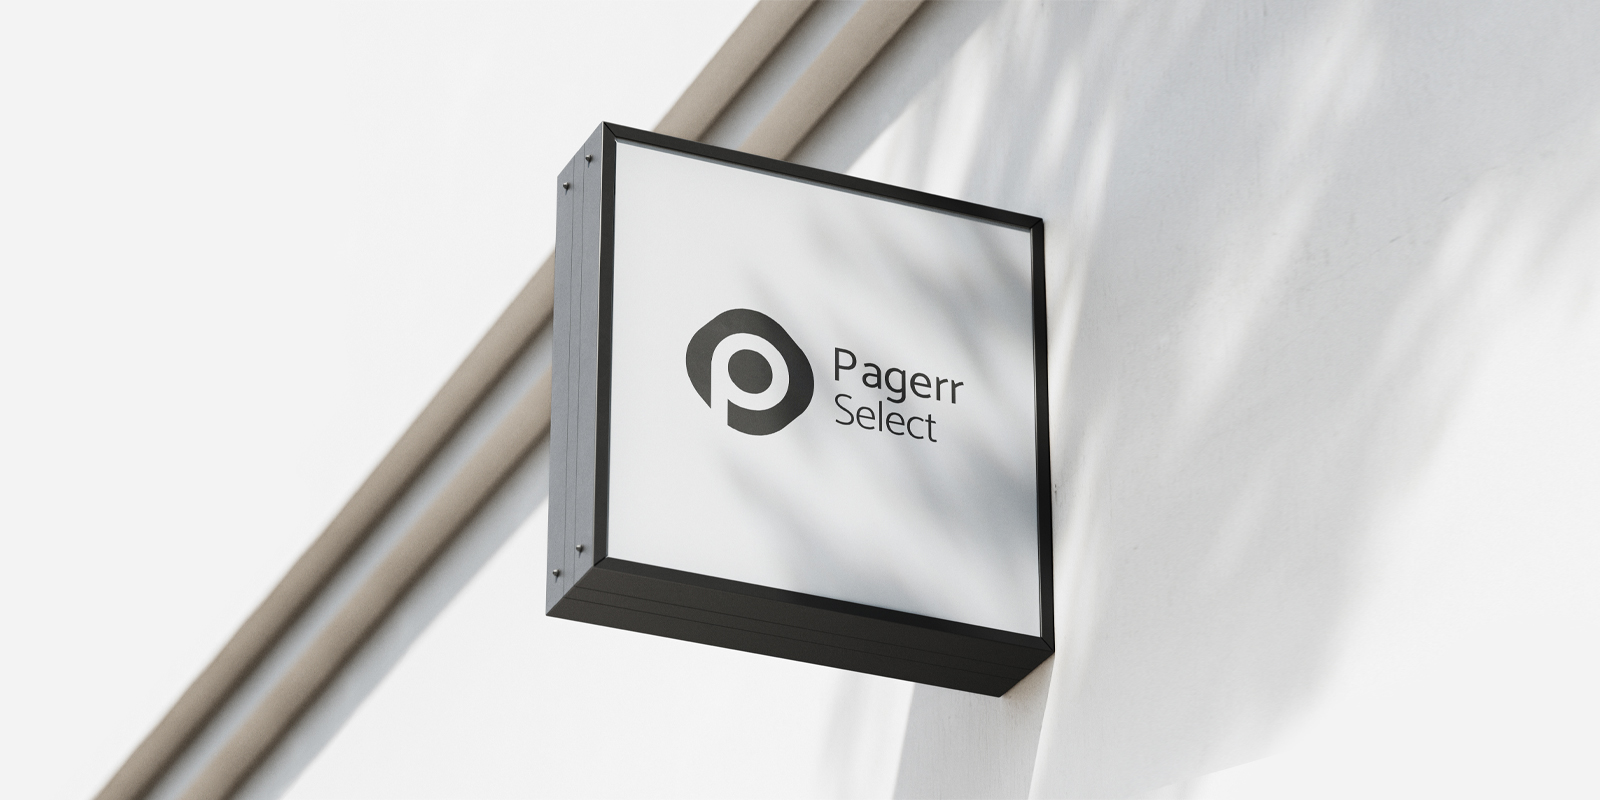 Essential signs in Logan City - Print with Pagerr